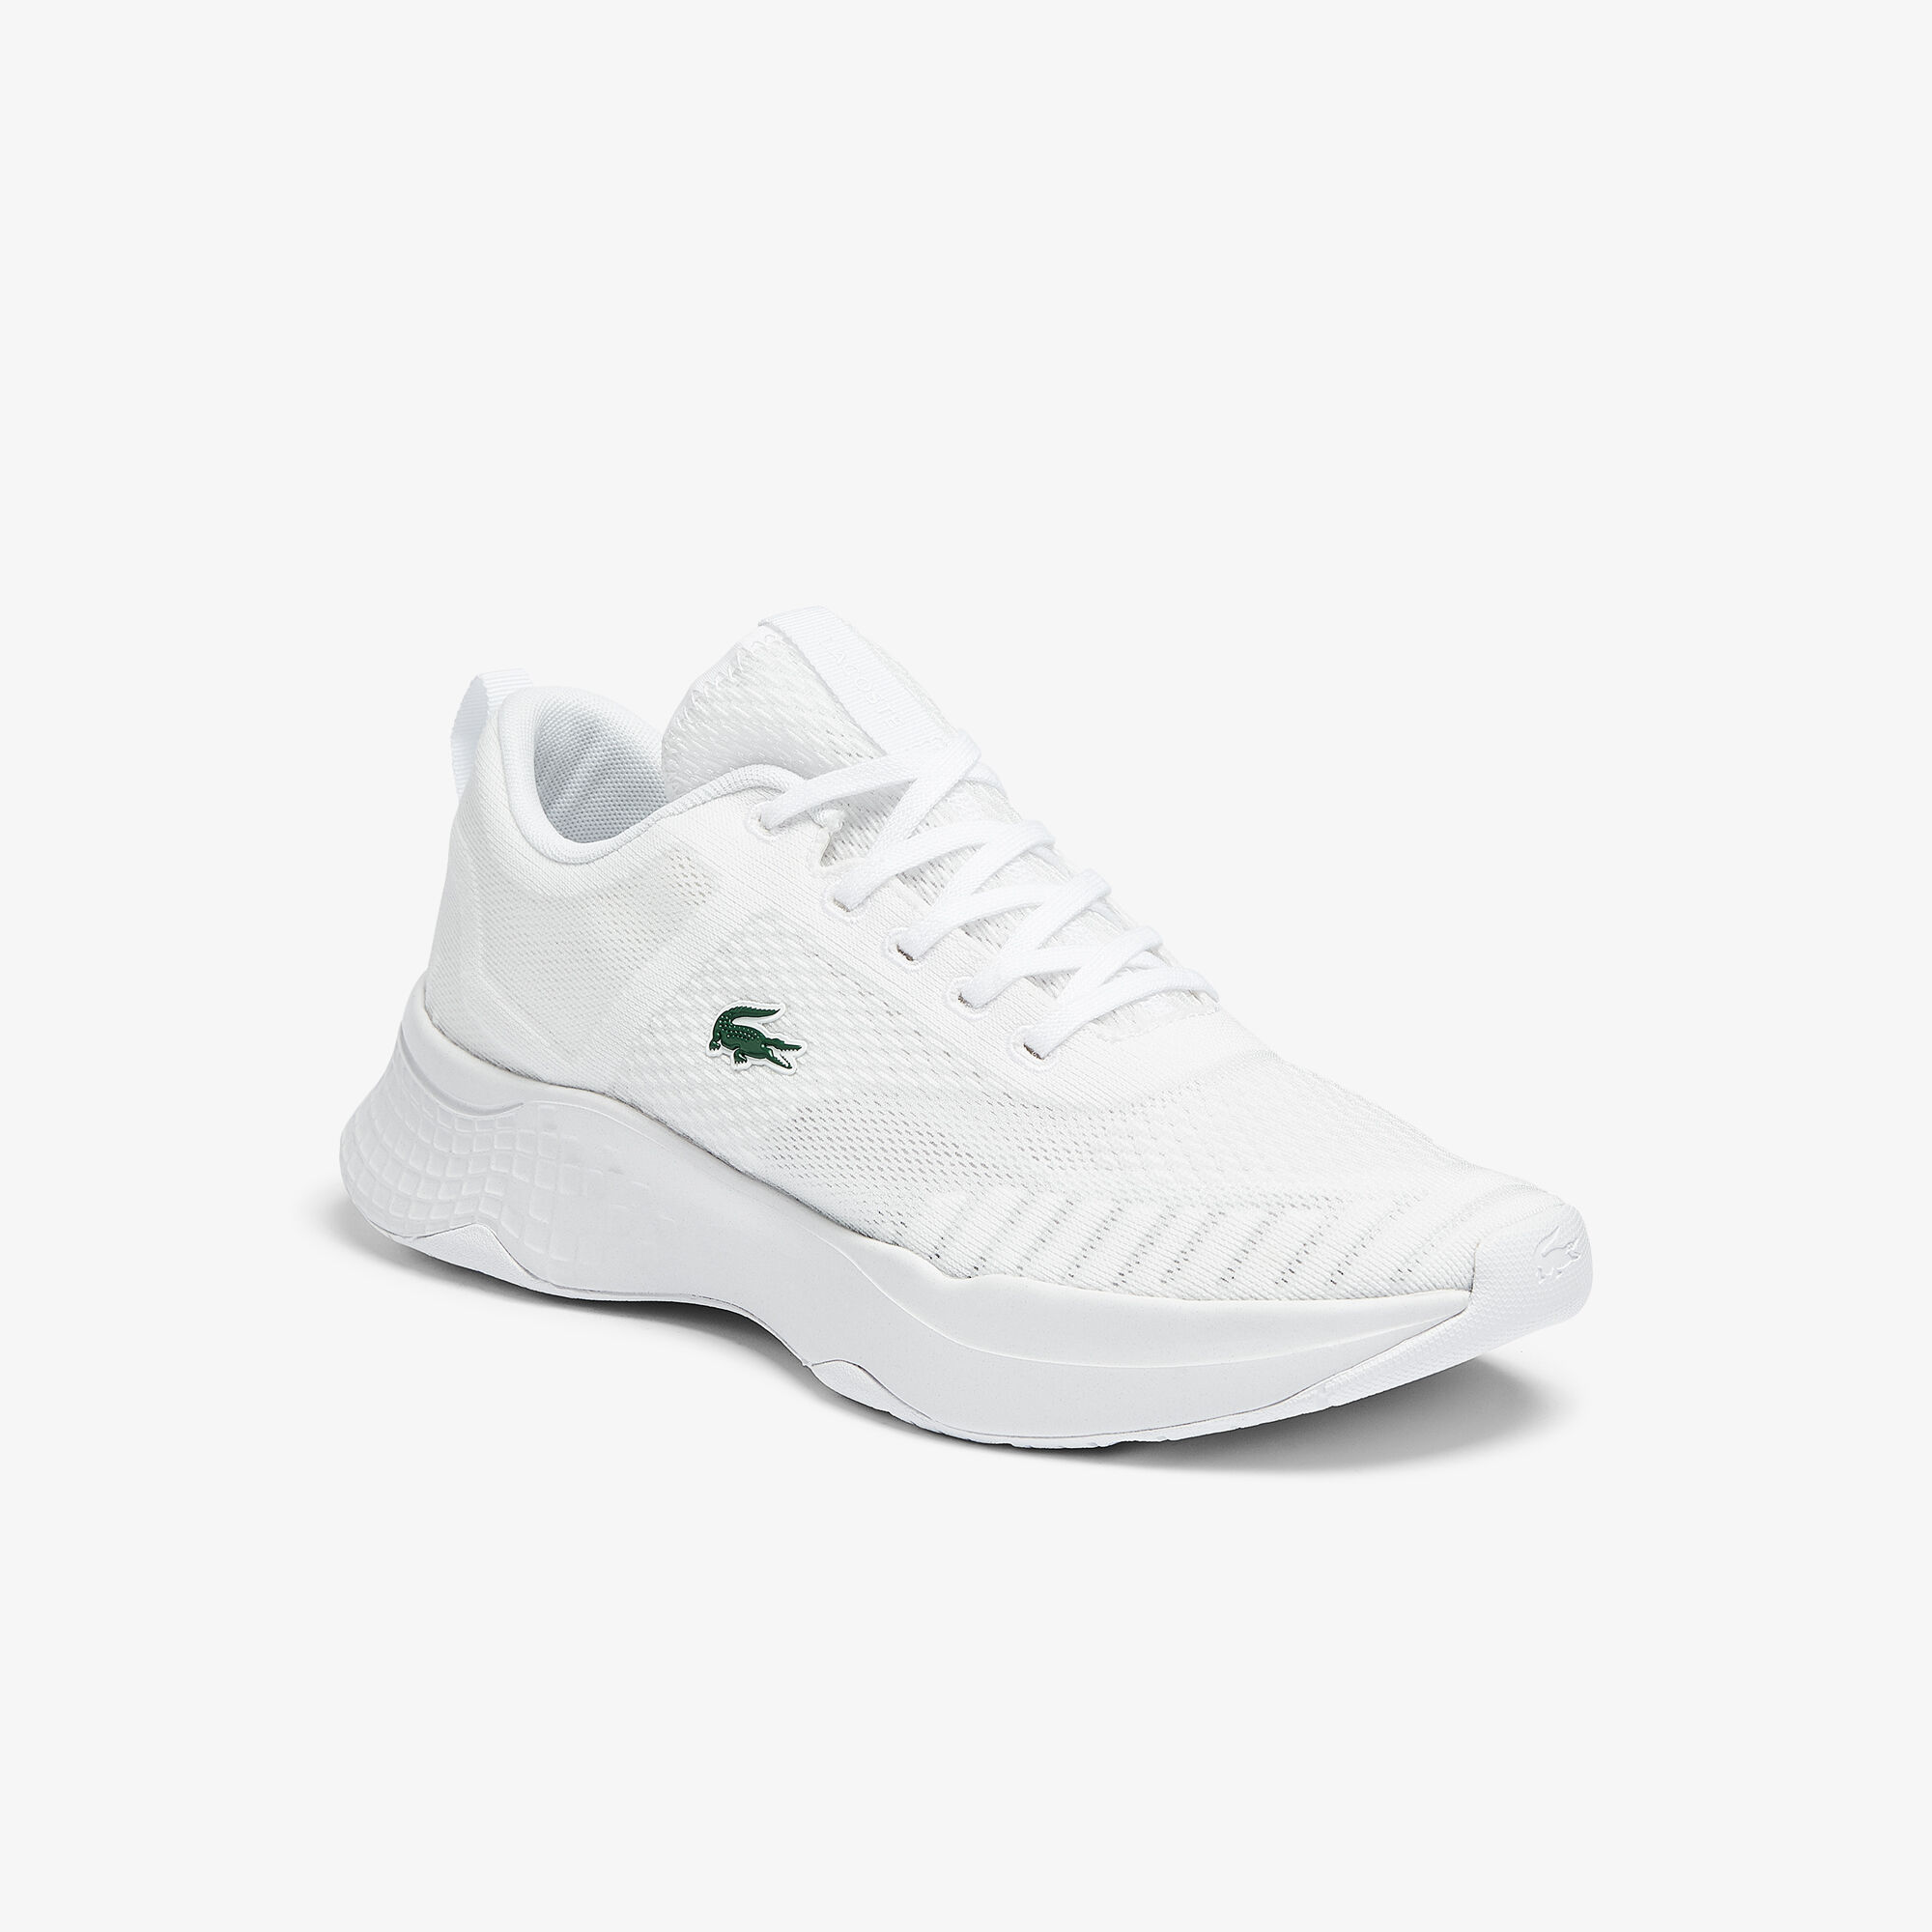 Men's Court-Drive Fly Textile Trainers